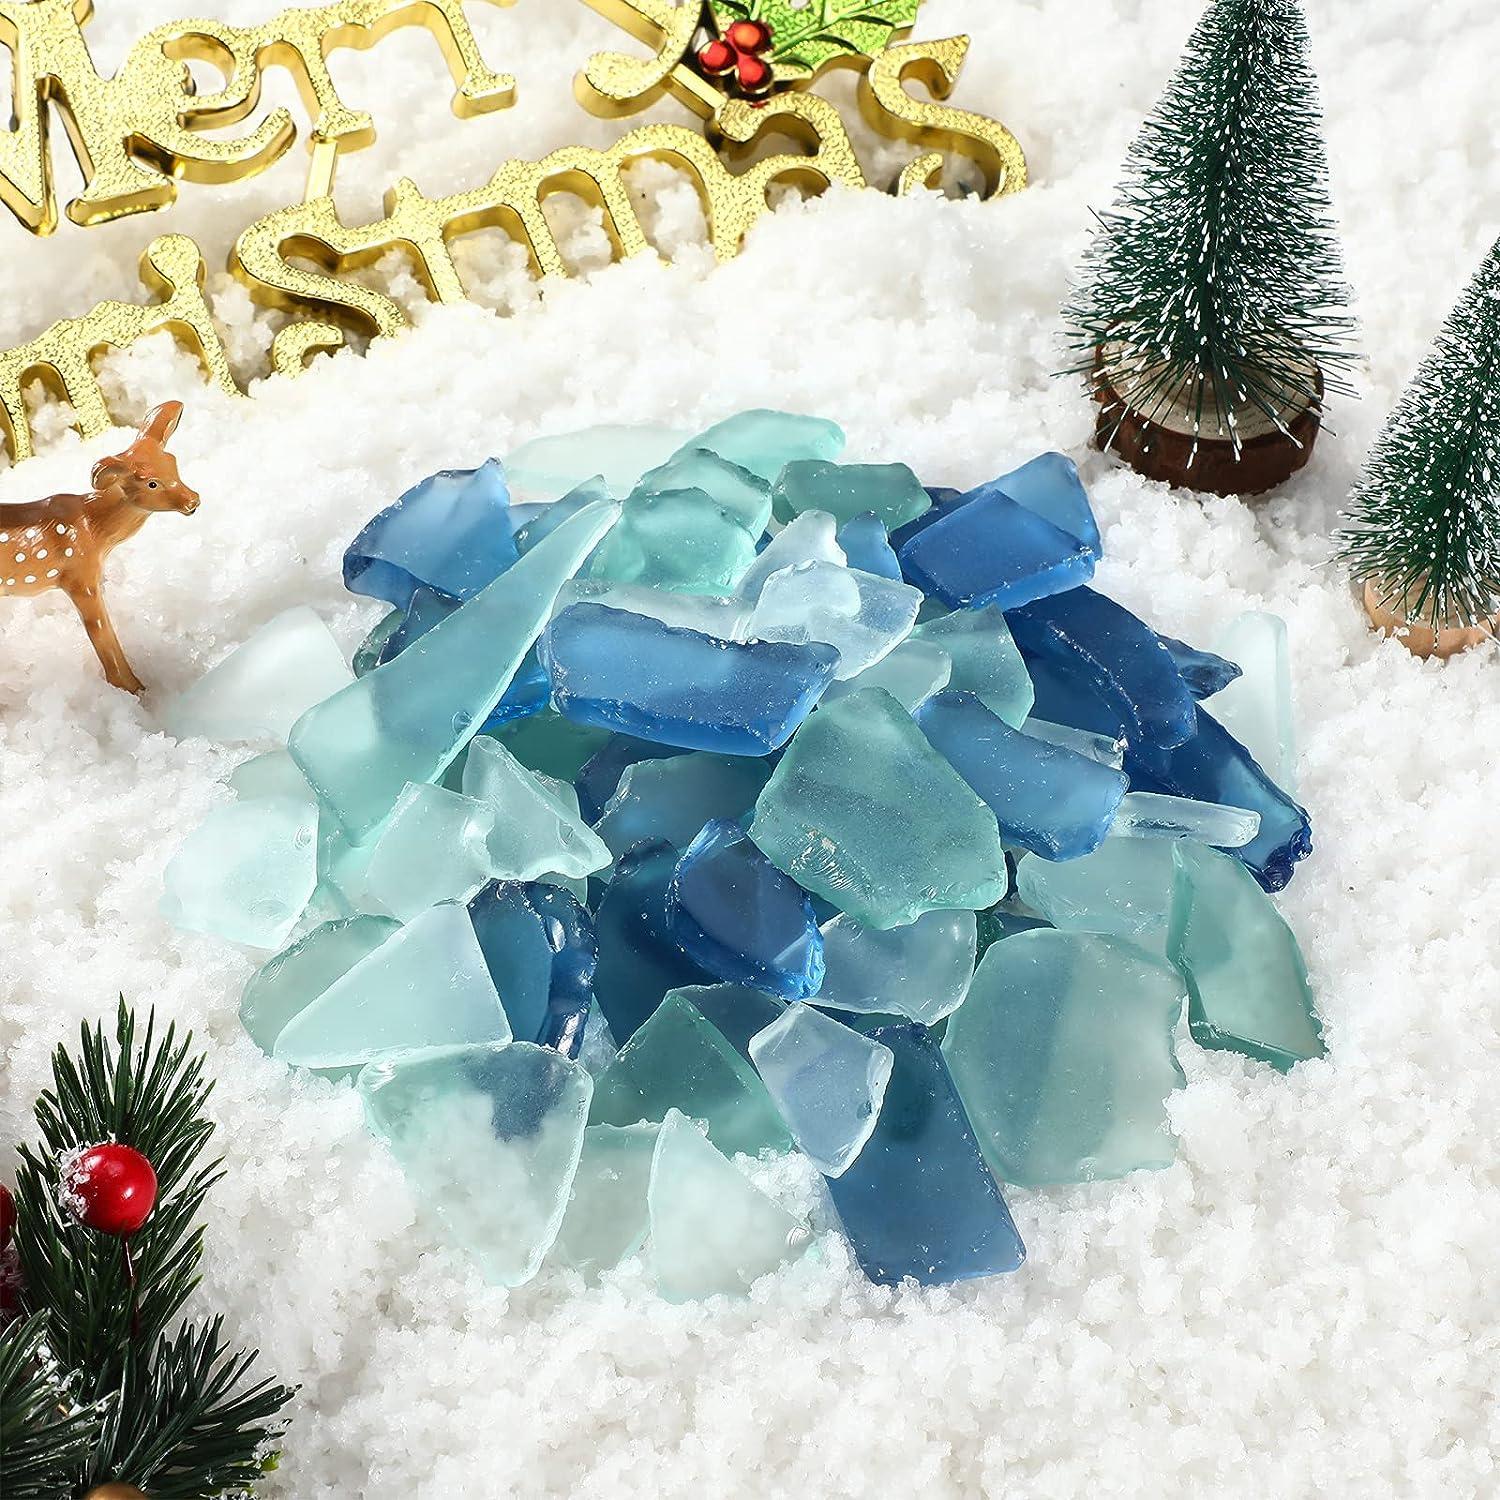 Jetec Sea Glass for Crafts Seaglass Pieces Decor Flat Frosted Sea Glass  Vase Filler Crushed Sea Glass for Beach Wedding Party Decor Home Aquarium